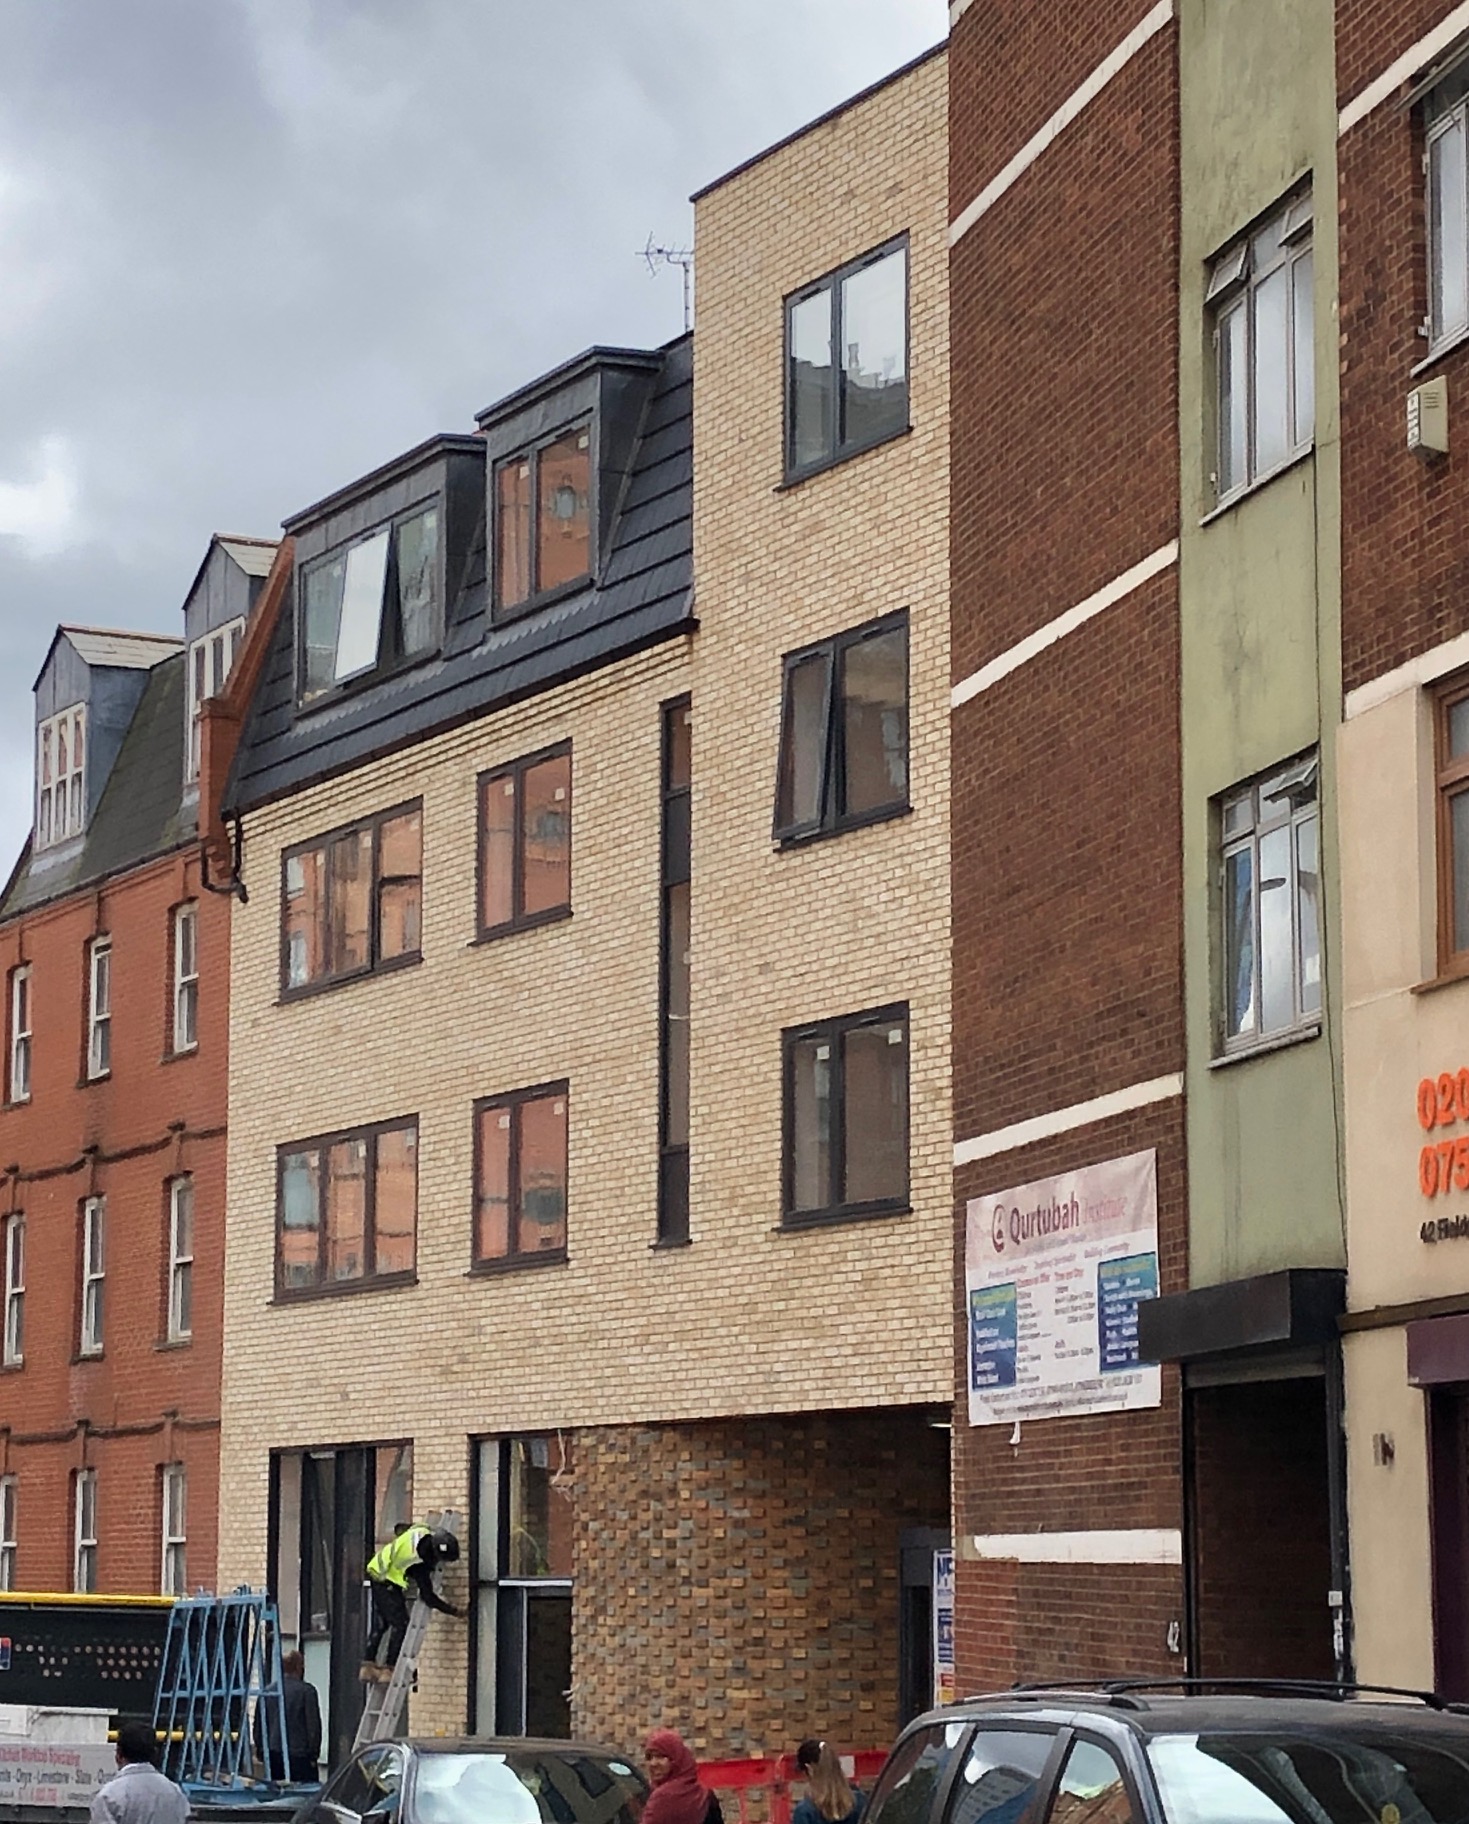 7 No Luxury Apartments Completed Project -May 2019 Contract Value £1.5m